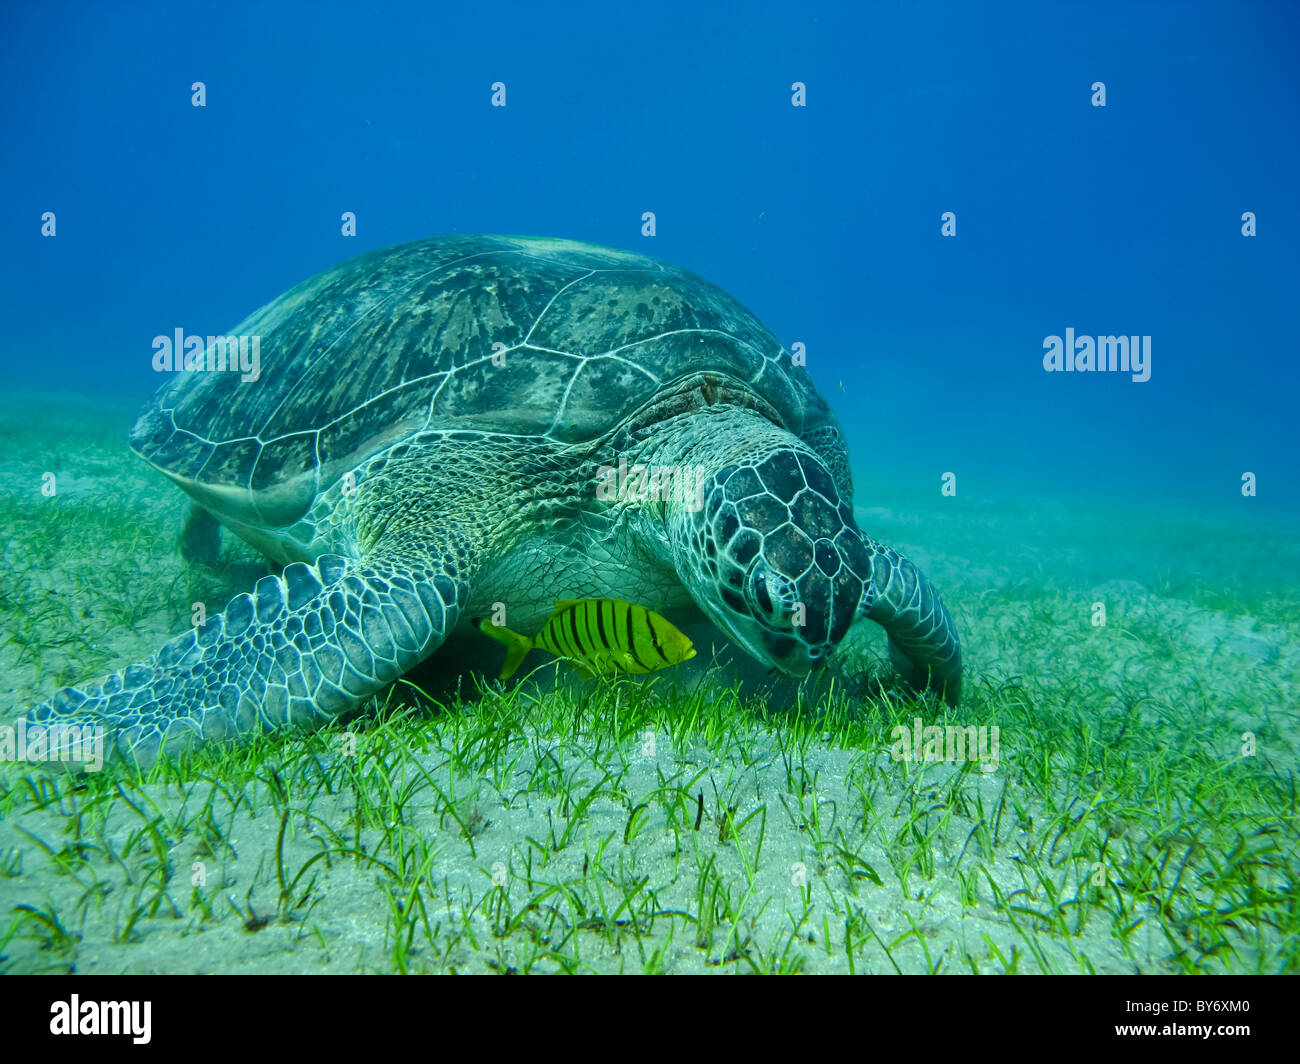 Green Turtle, Chelonia mydas, Green Sea Turtle, Suppenschildkröte, Abu Dabab, Egypt feeding from sea grass with a little fish Stock Photo